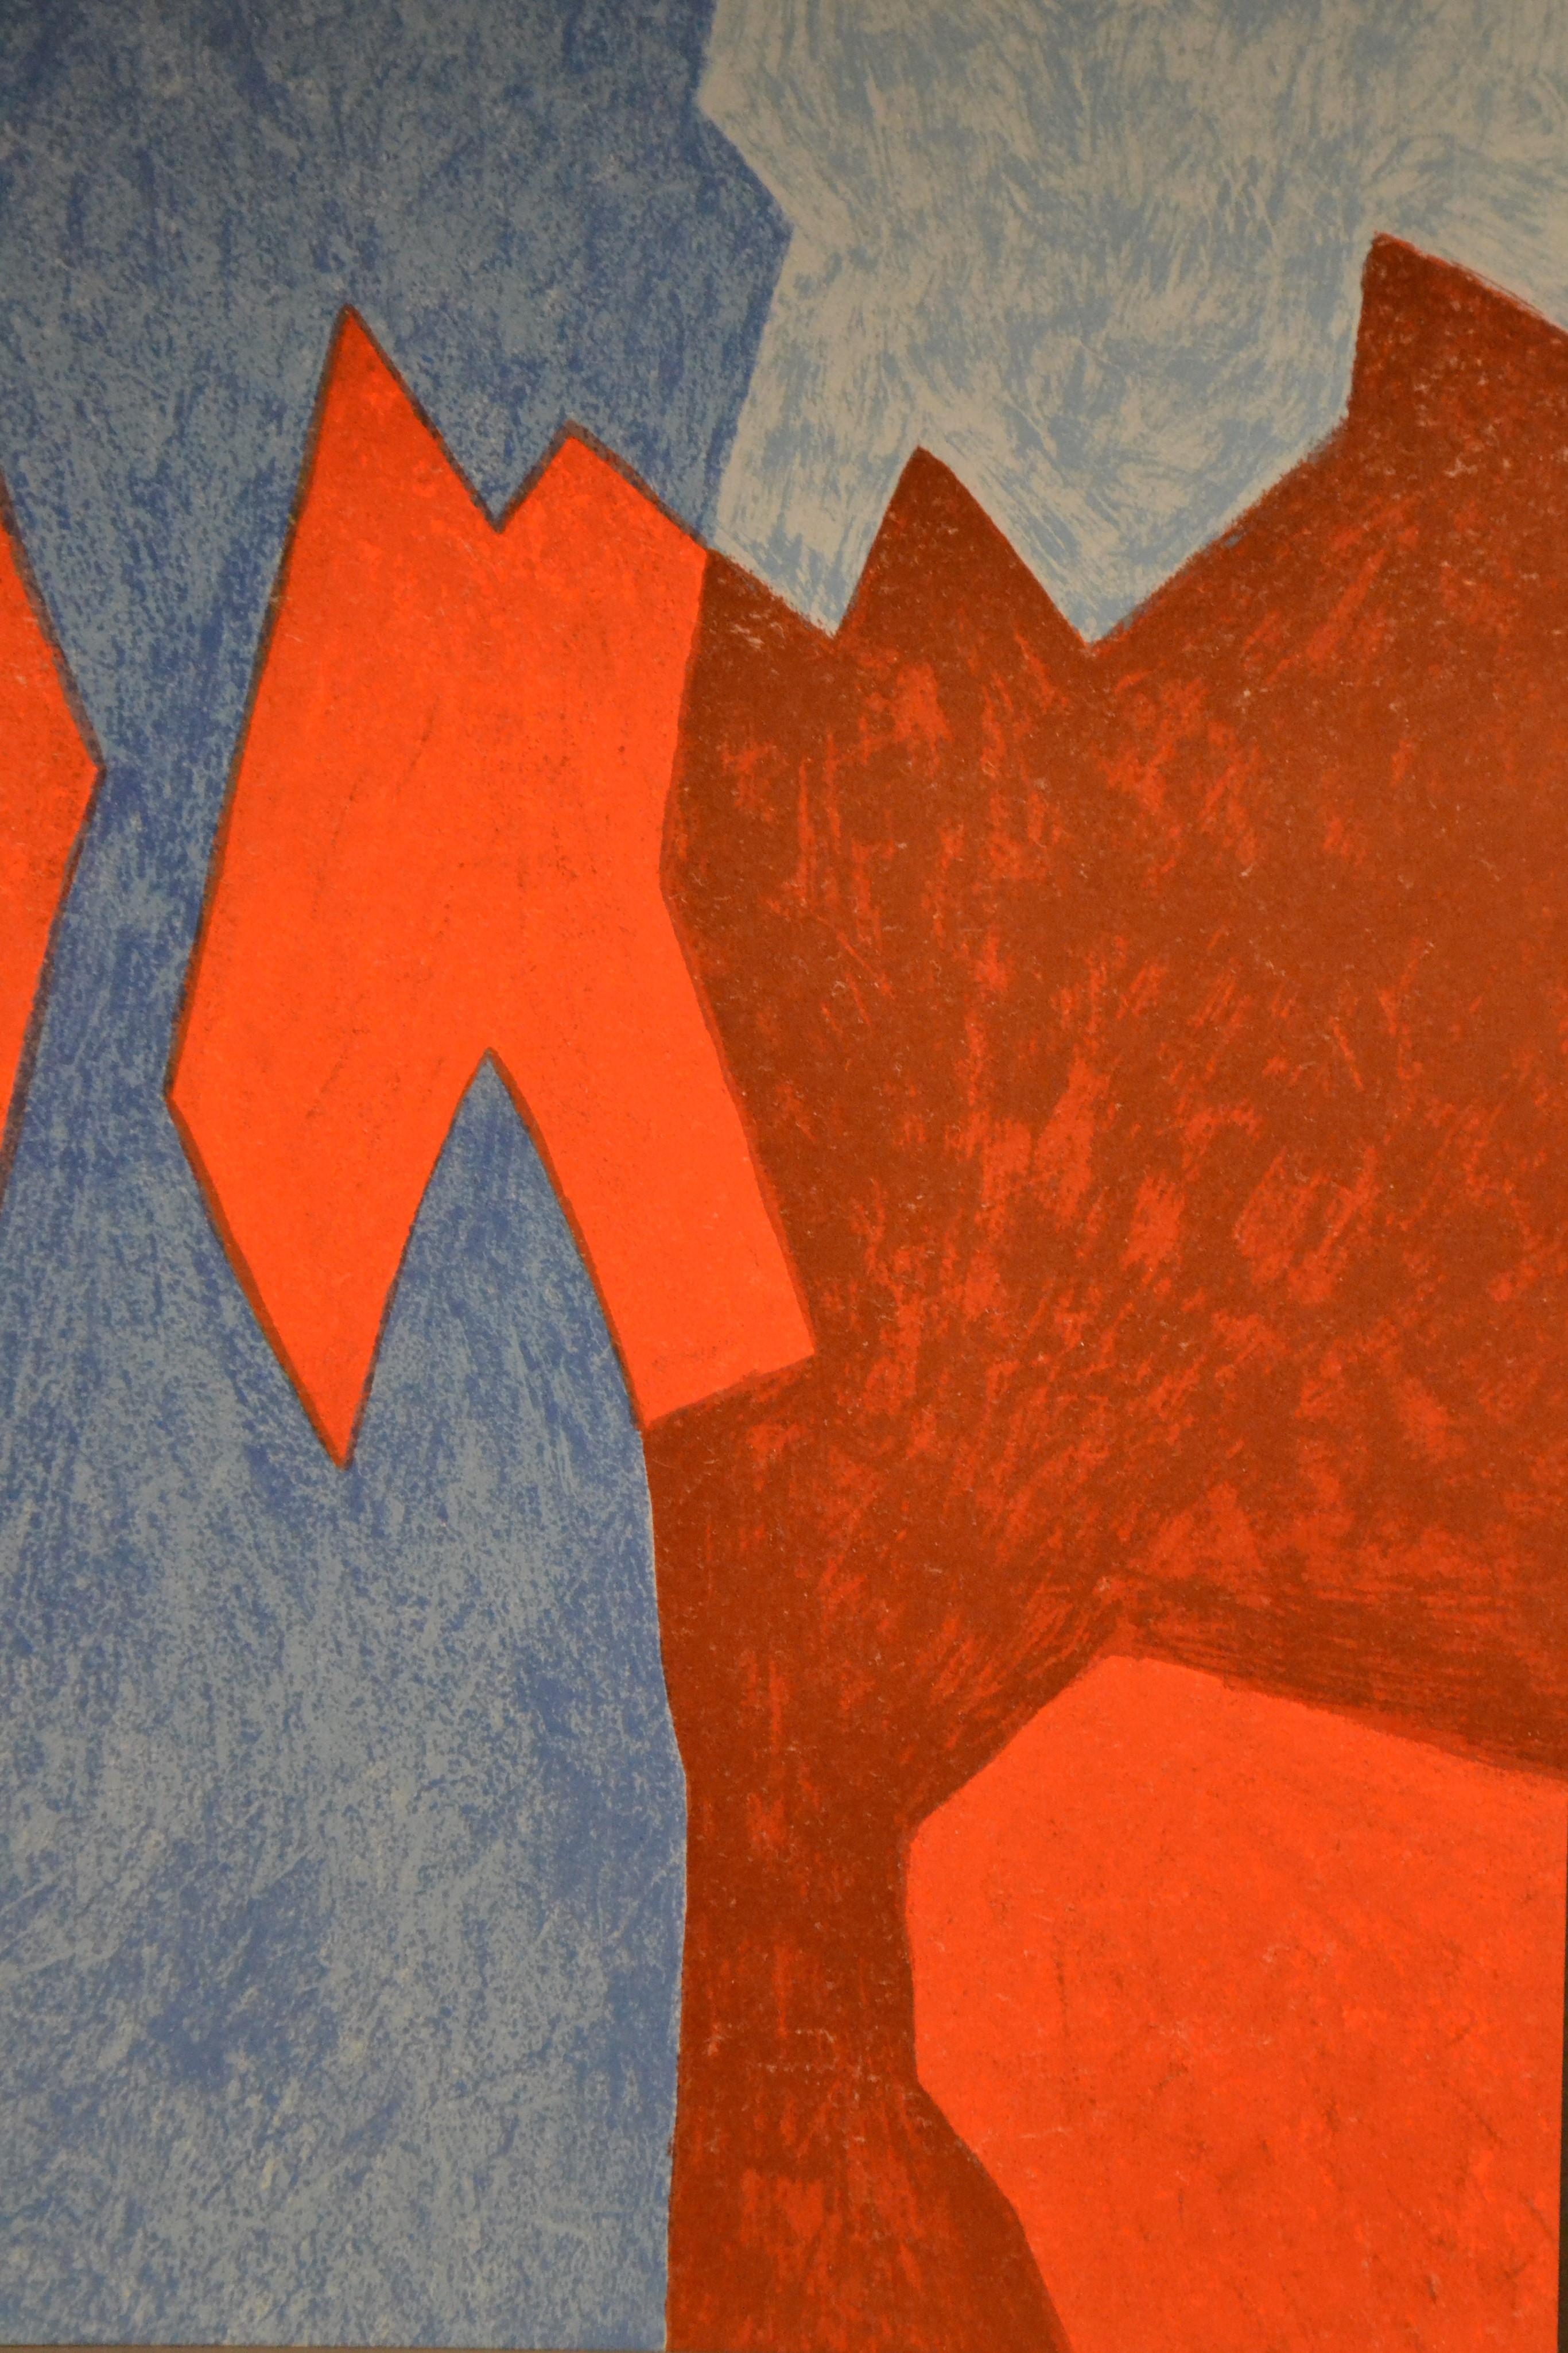 Blue And Red Composition   - Original Lithograph by Serge Poliakoff - 1968 2